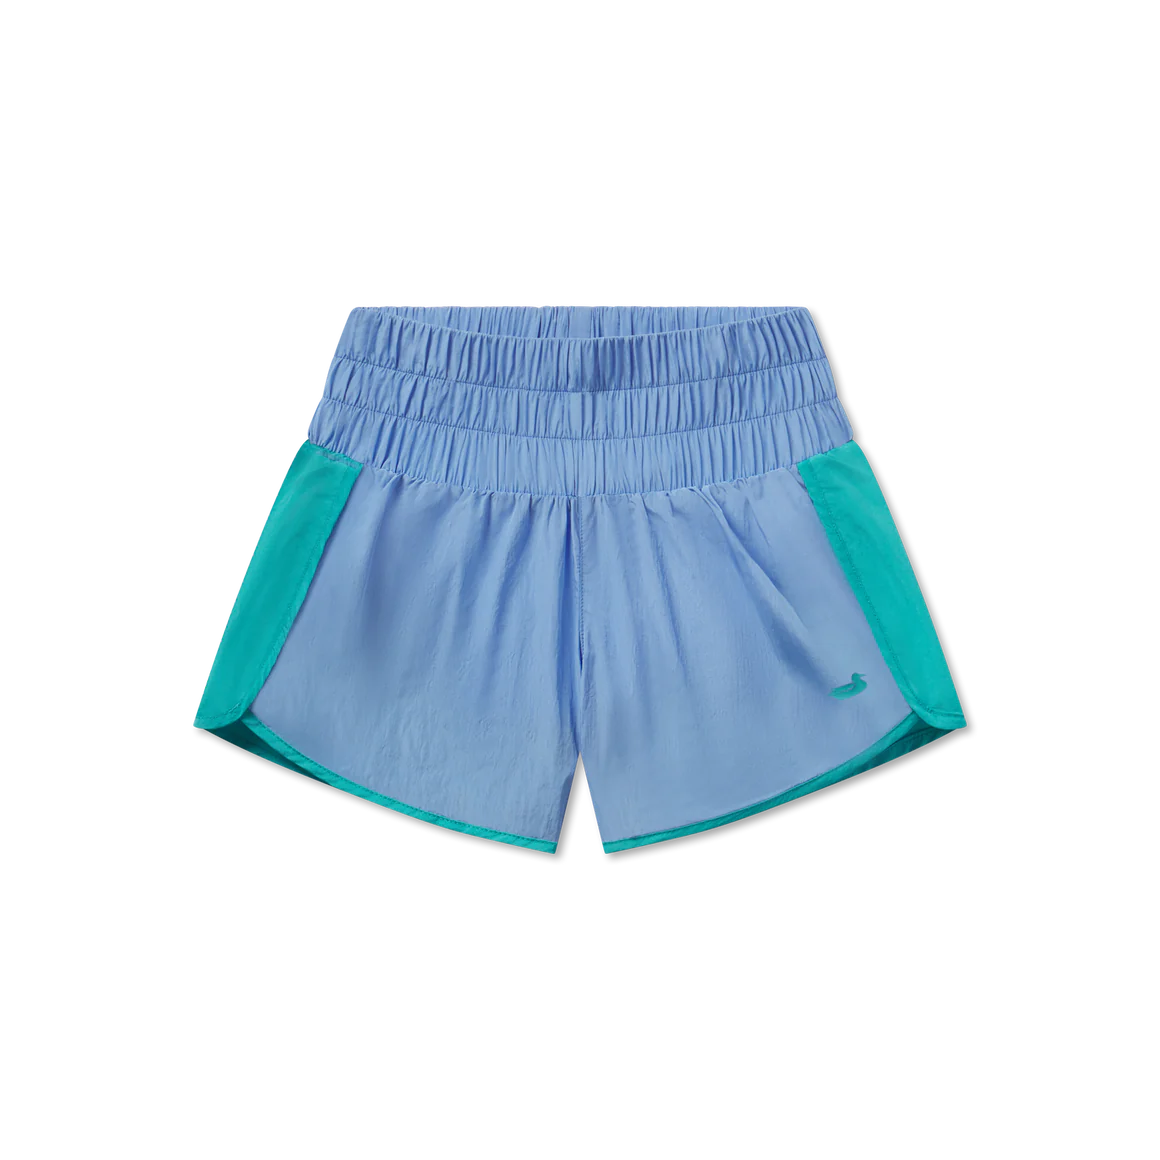 Lele Performance Shorts in Teal & Lilac